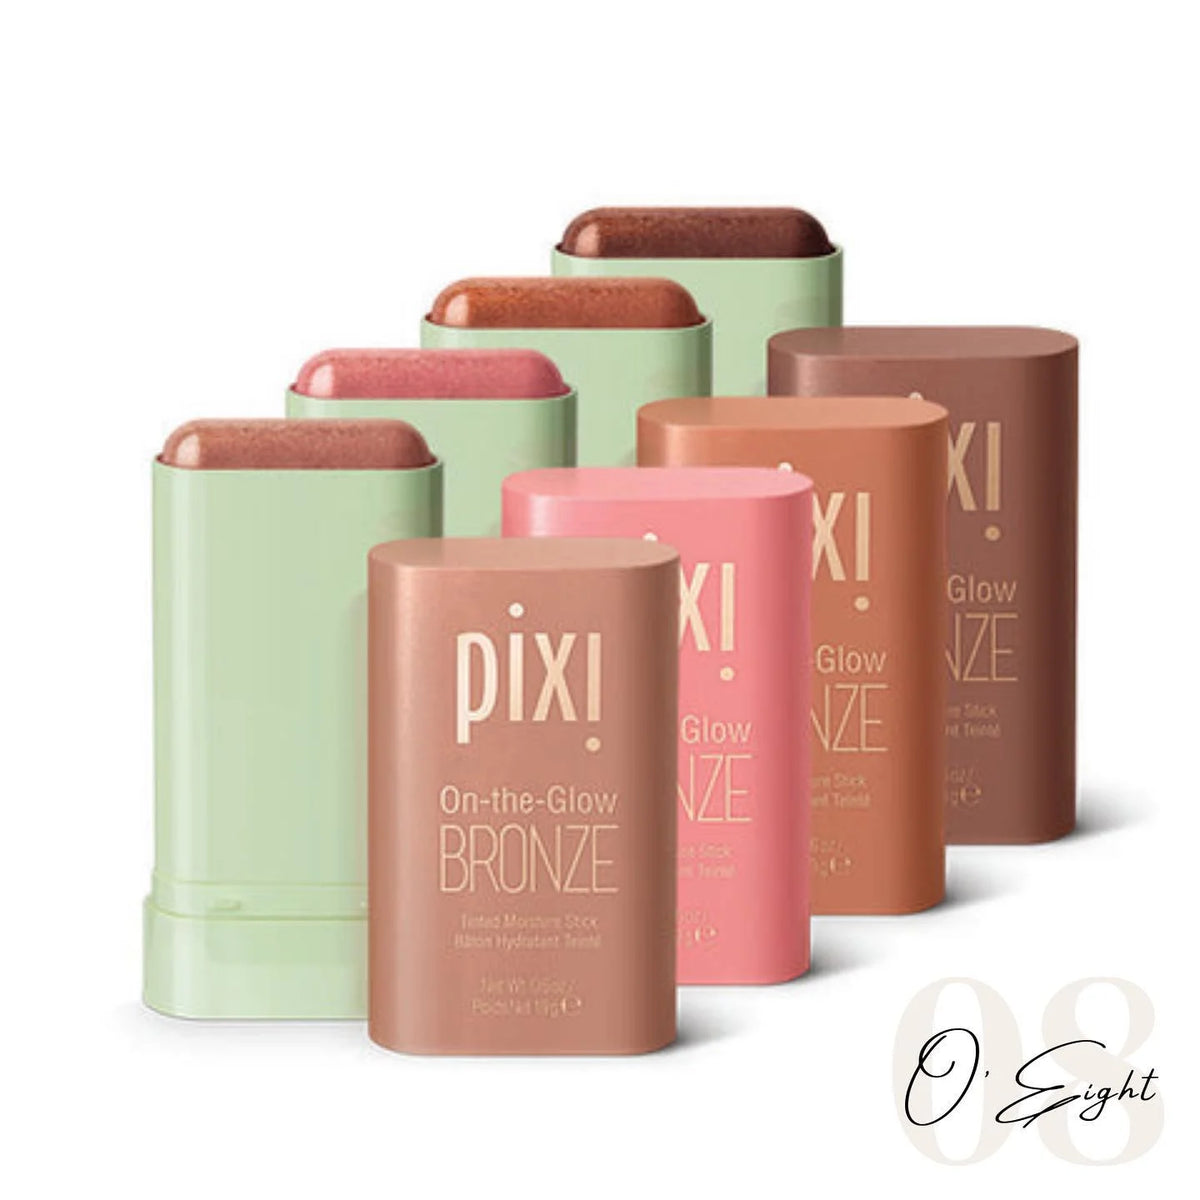 Pack of 4 PIXI On-the-Glow Bronze